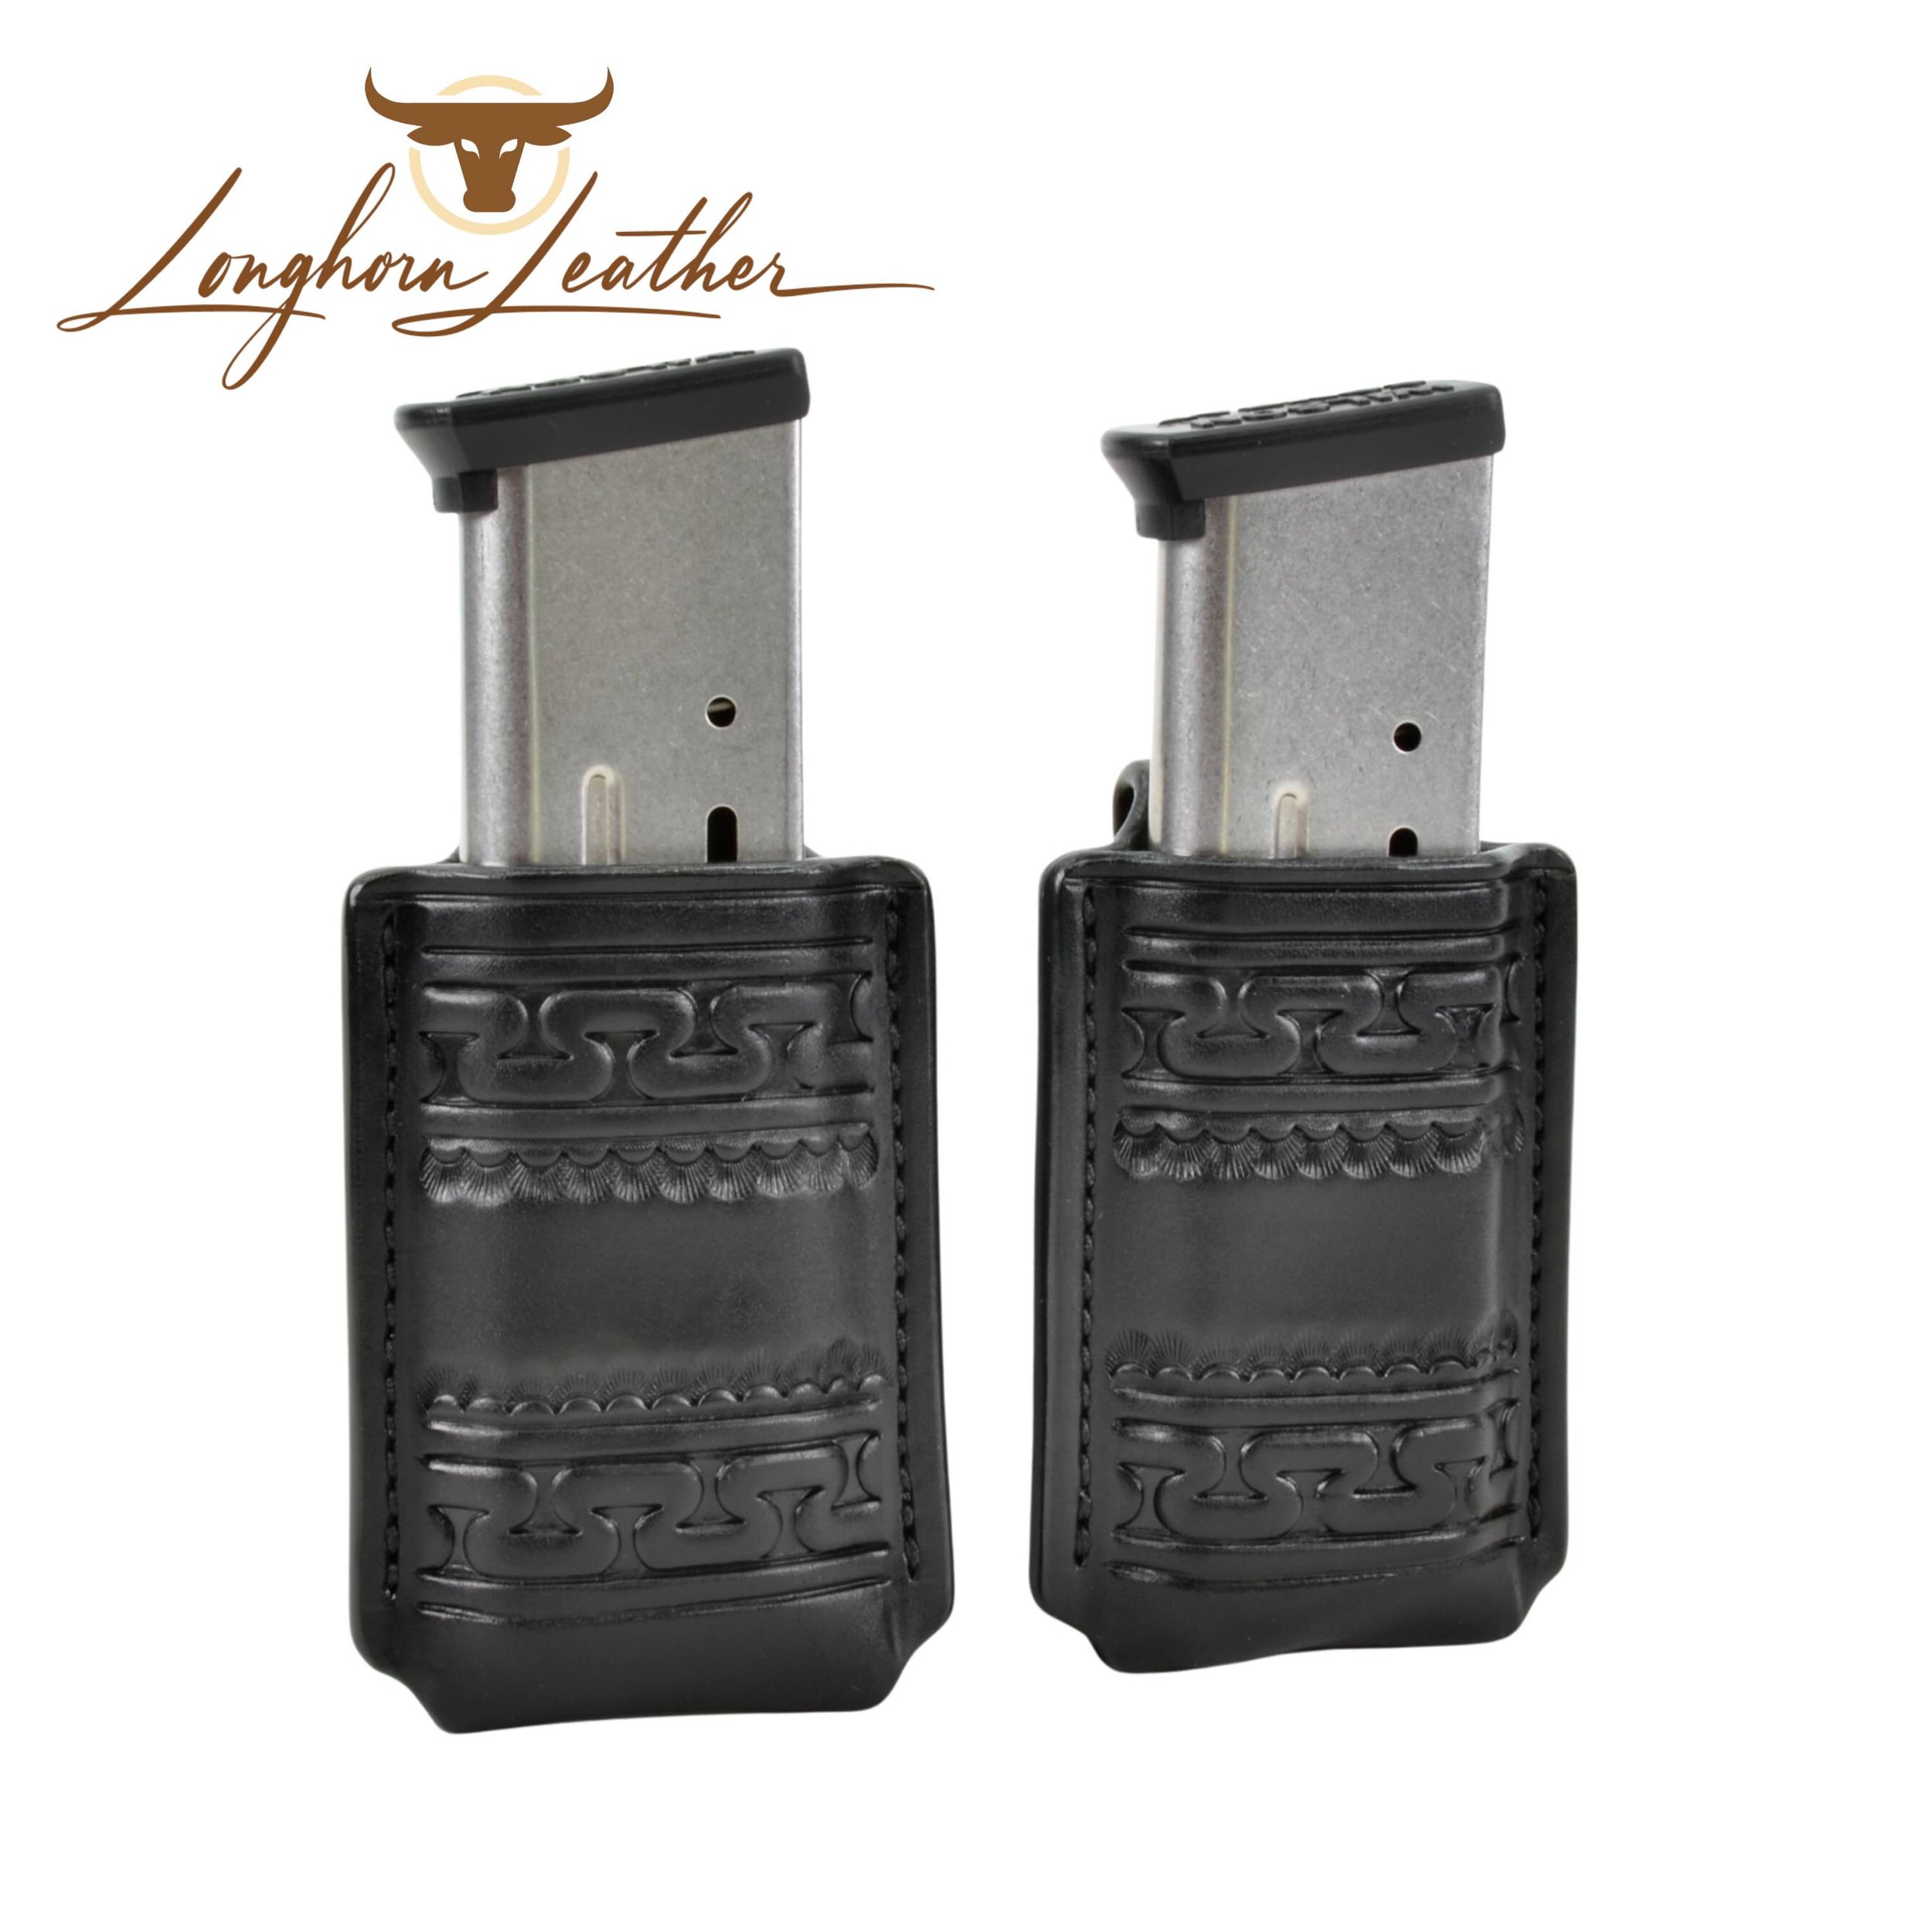 Custom leather 1911 single magazine carrier featuring the Yuma design.  Individually handcrafted at Longhorn Leather AZ